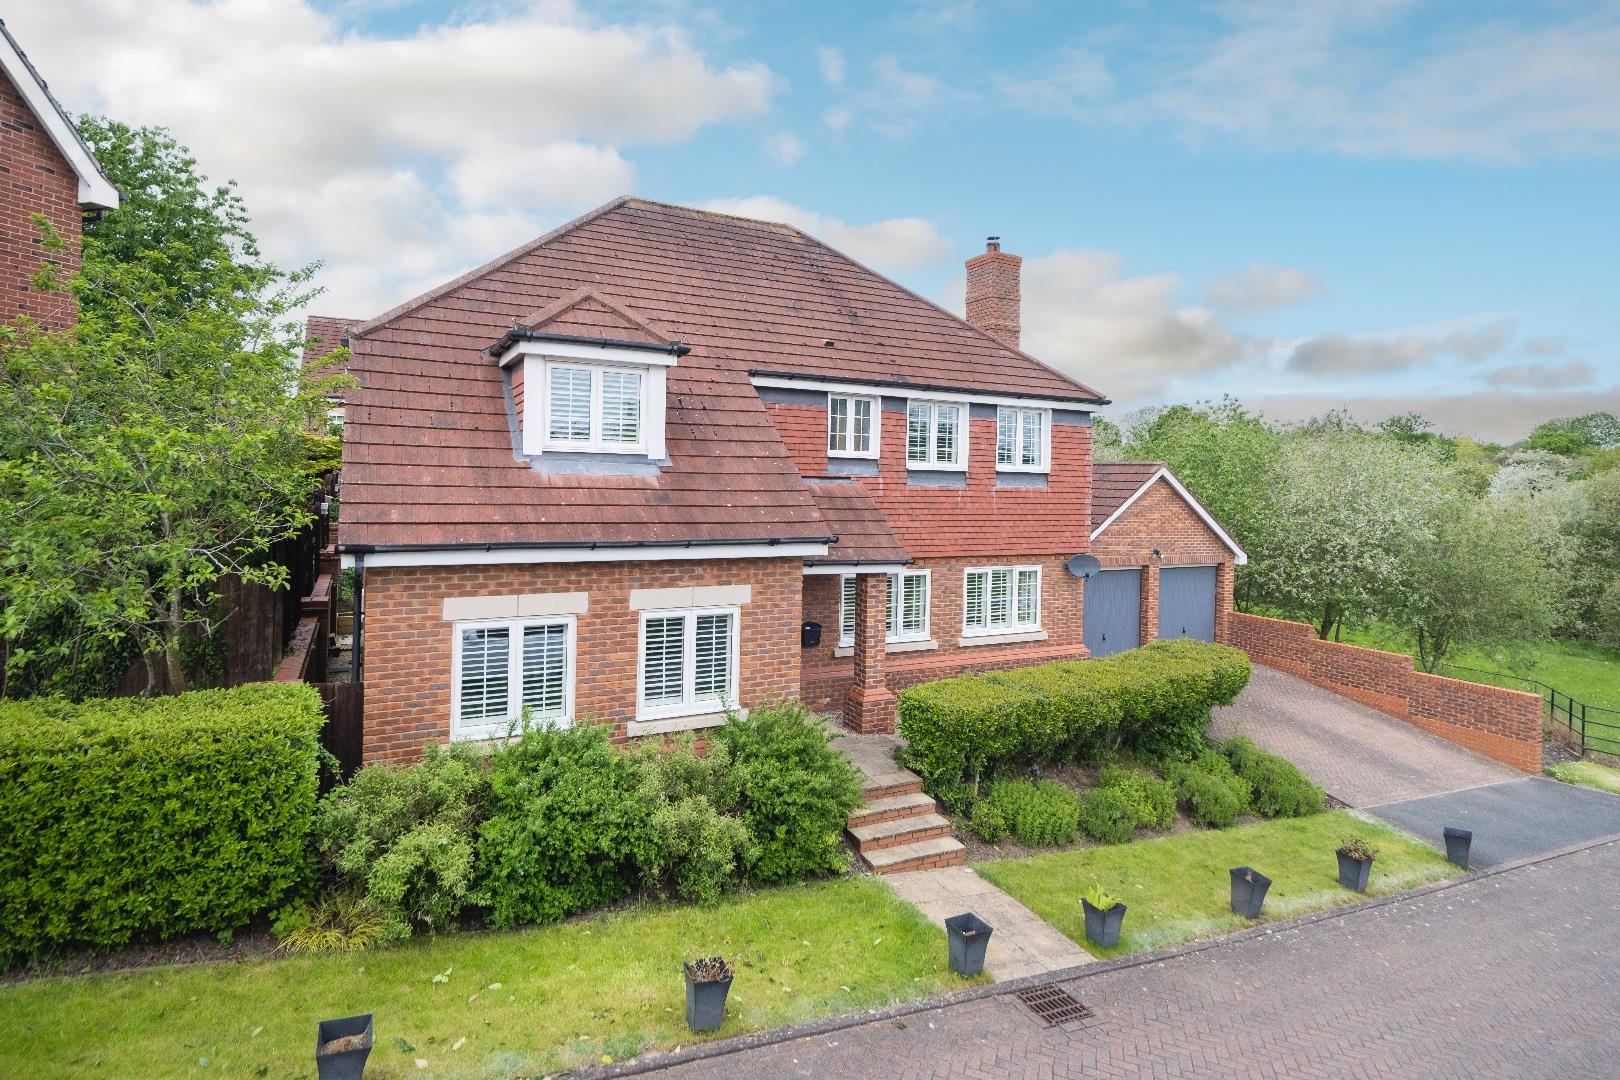 5 bedroom  Detached House for Sale in Weston